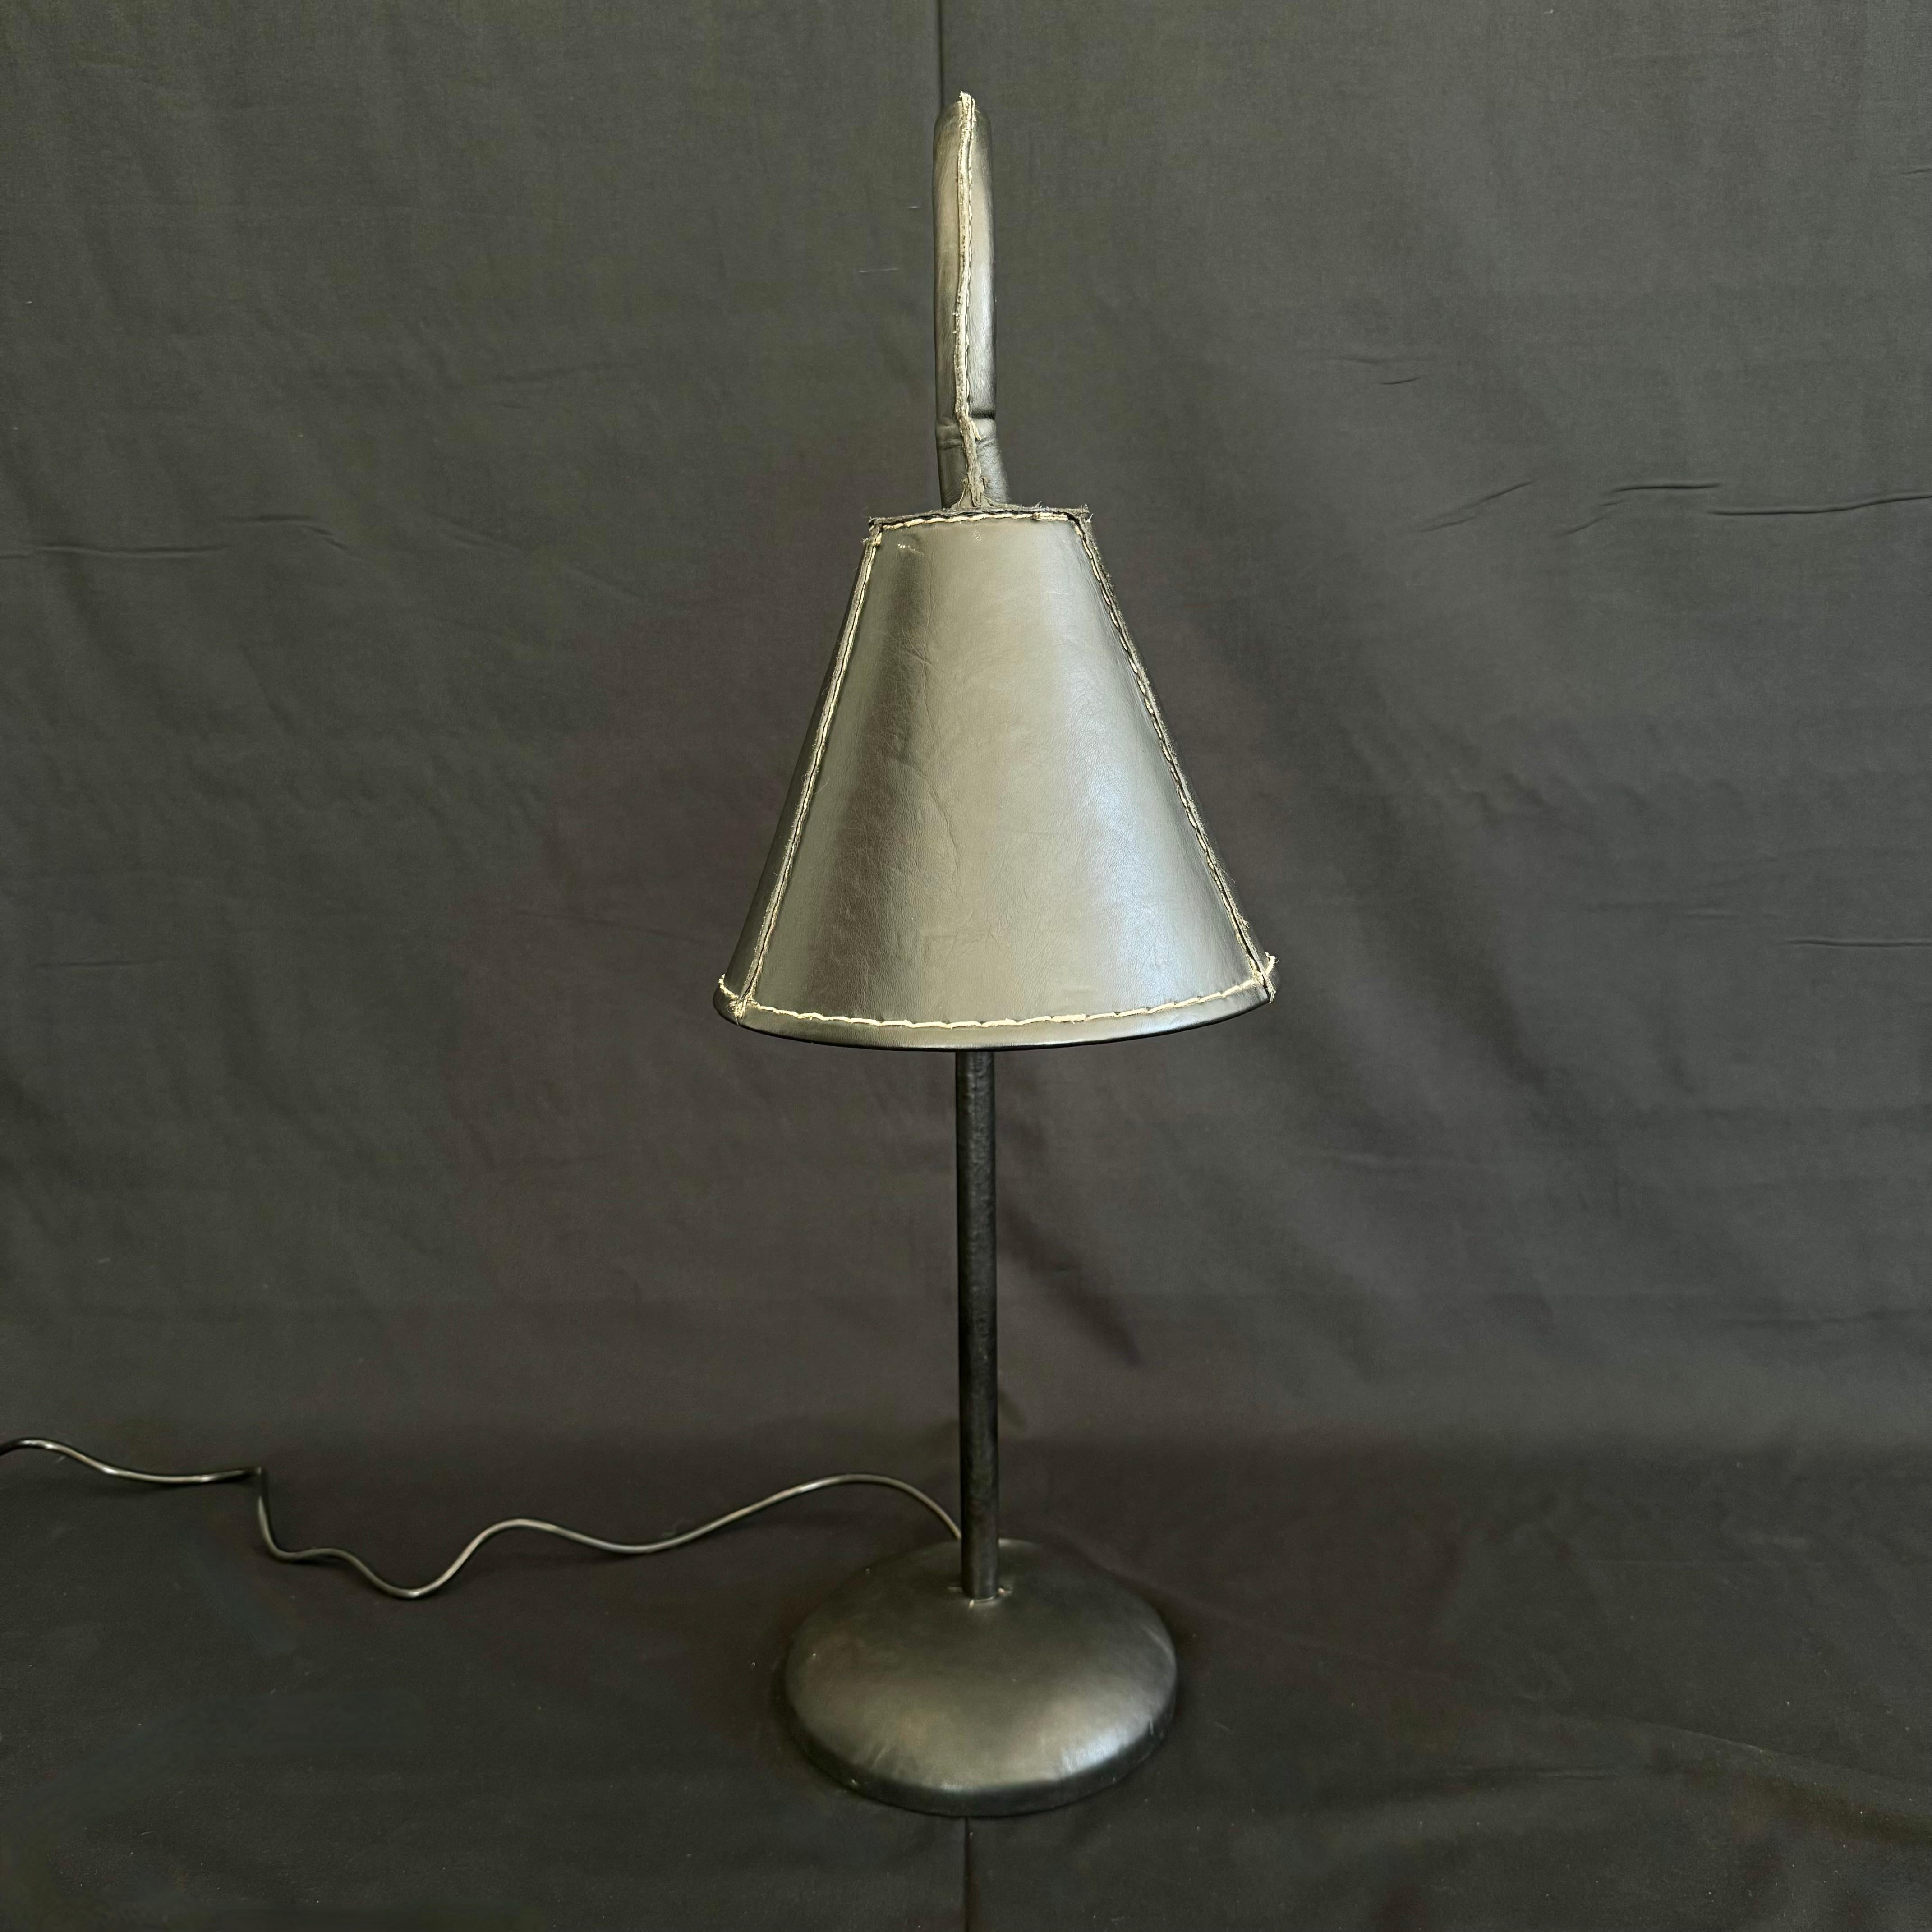 Handsome leather arched table lamp by Spanish design house, Valenti. Based in Barcelona and founded over 200 years ago, Valenti has deep roots in high end furniture and elegant designs. Made in the 1970s this table lamp is completely wrapped in an